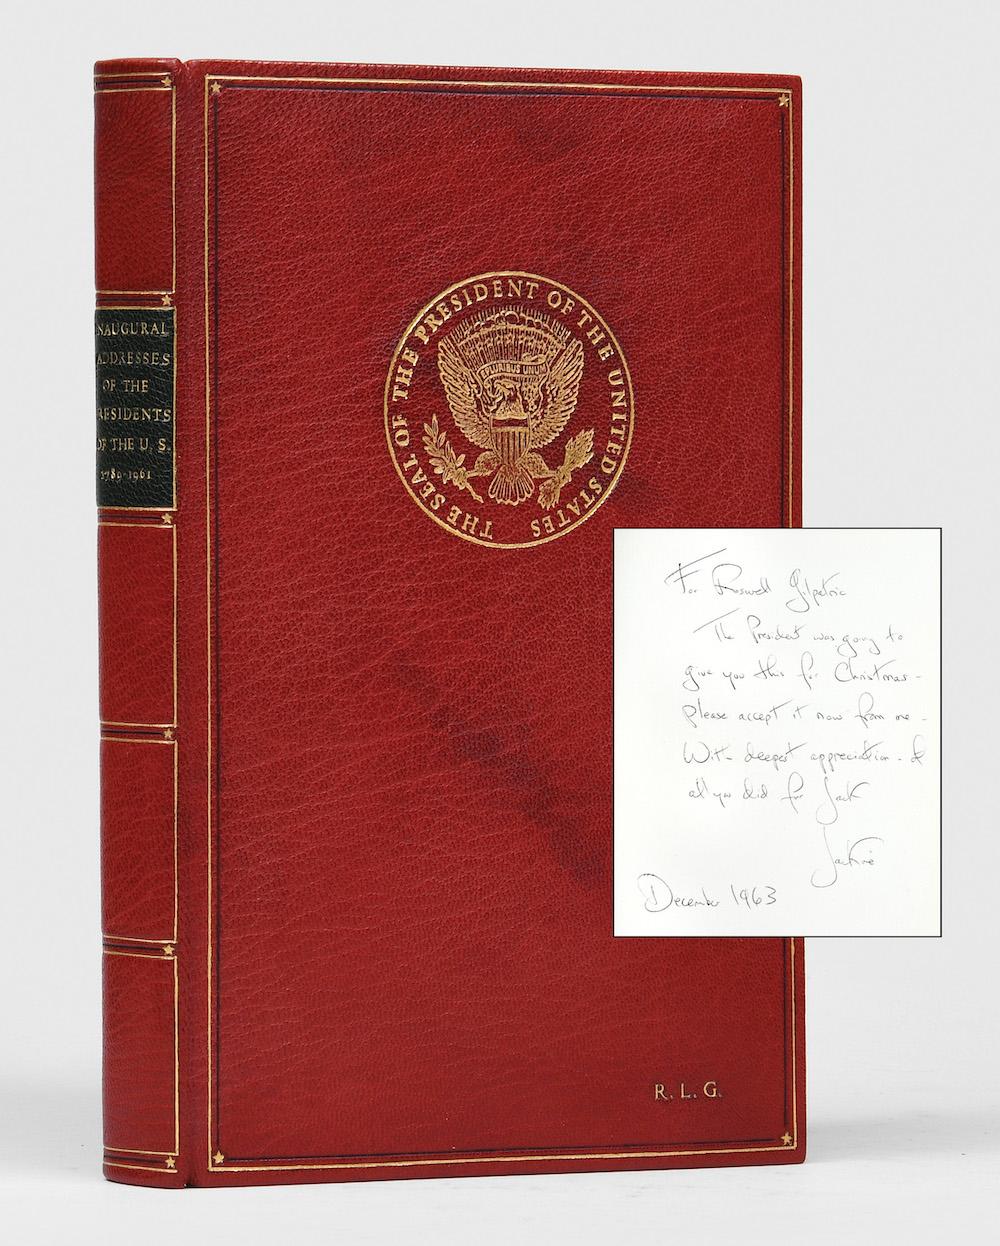 Inaugural addresses of the Presidents of the United States by John F. Kennedy